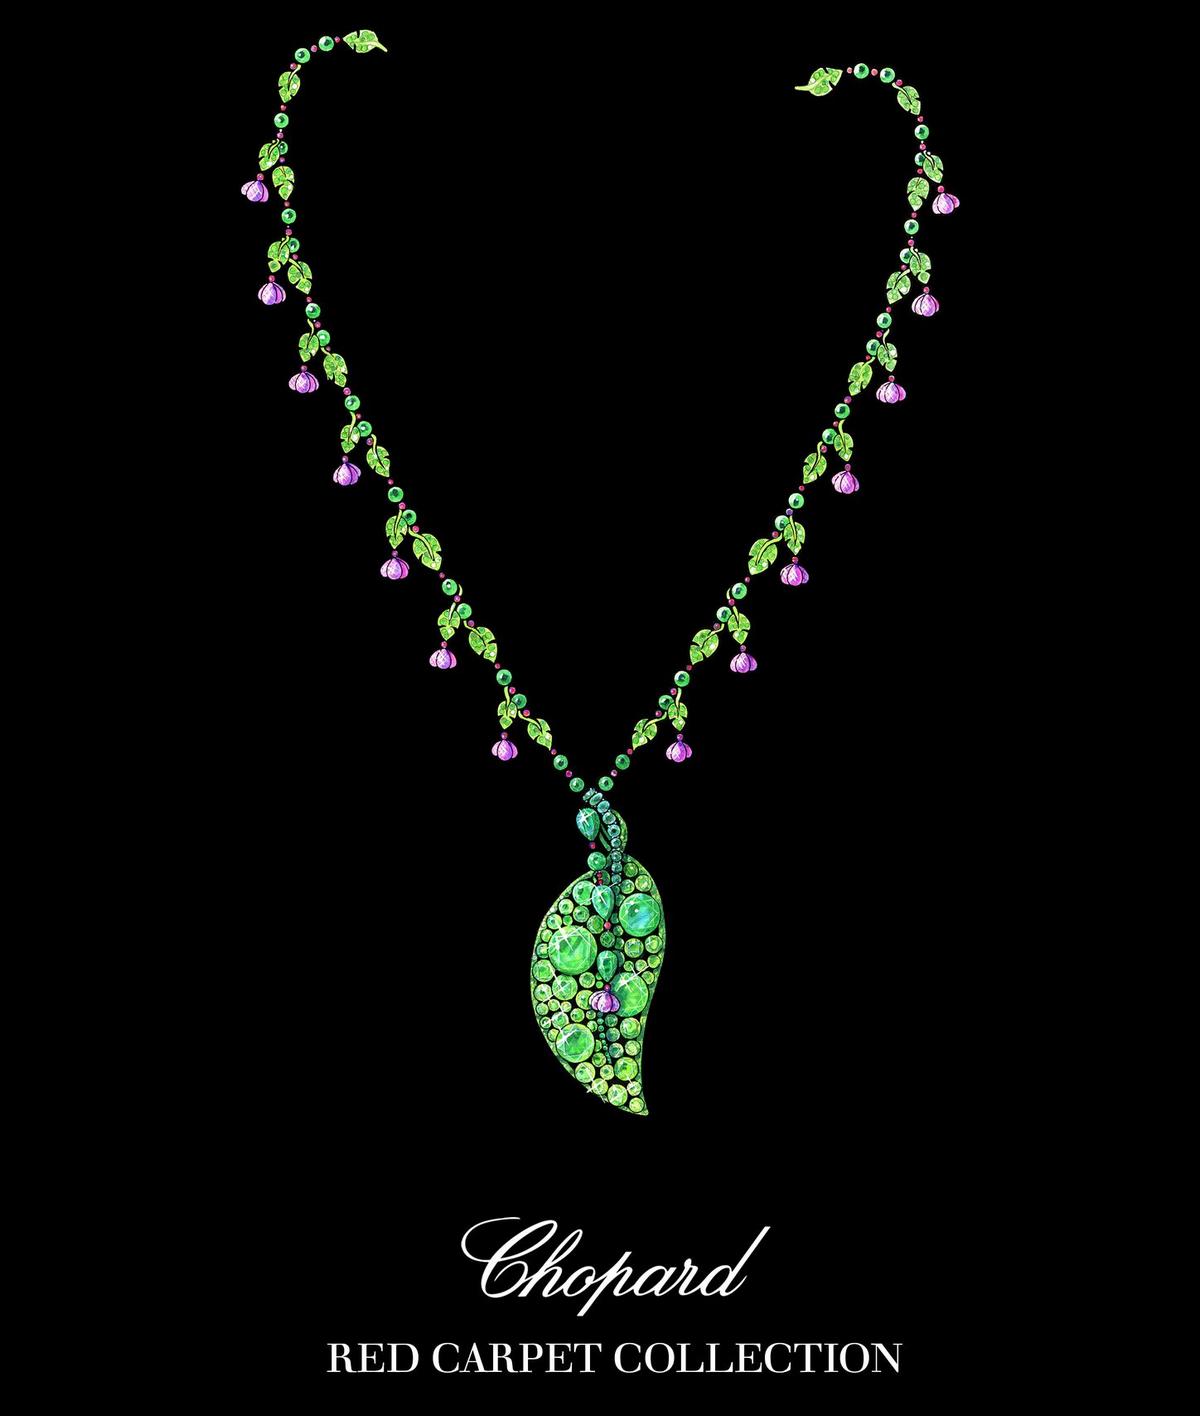 A sneak peek into the magnificent Chopard Red Carpet Collection